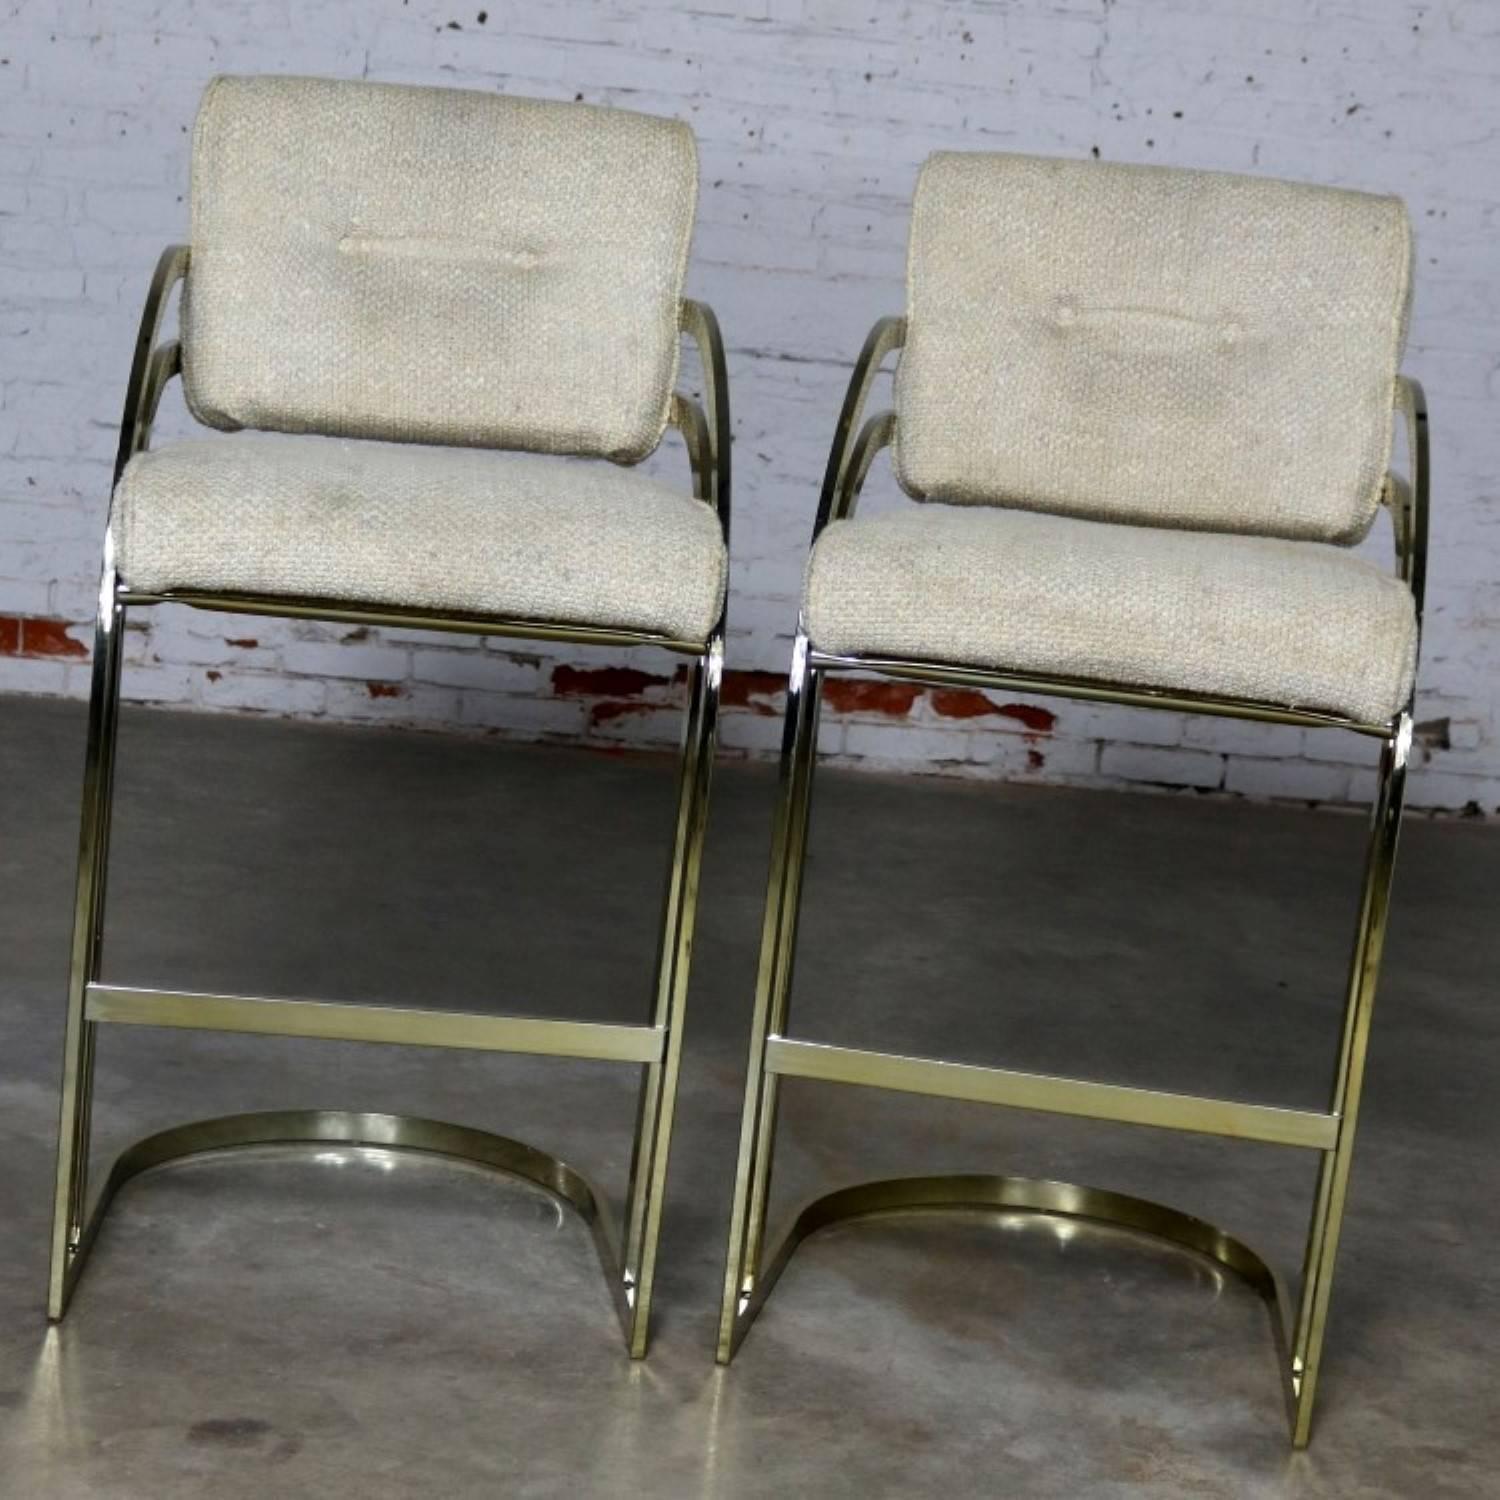 Wonderful pair of cantilever bar stools in the style of Milo Baughman for DIA. They are brass plated with upholstered seats and backs and in wonderful vintage condition. The brass plating is in great shape with minor scratching as you would expect